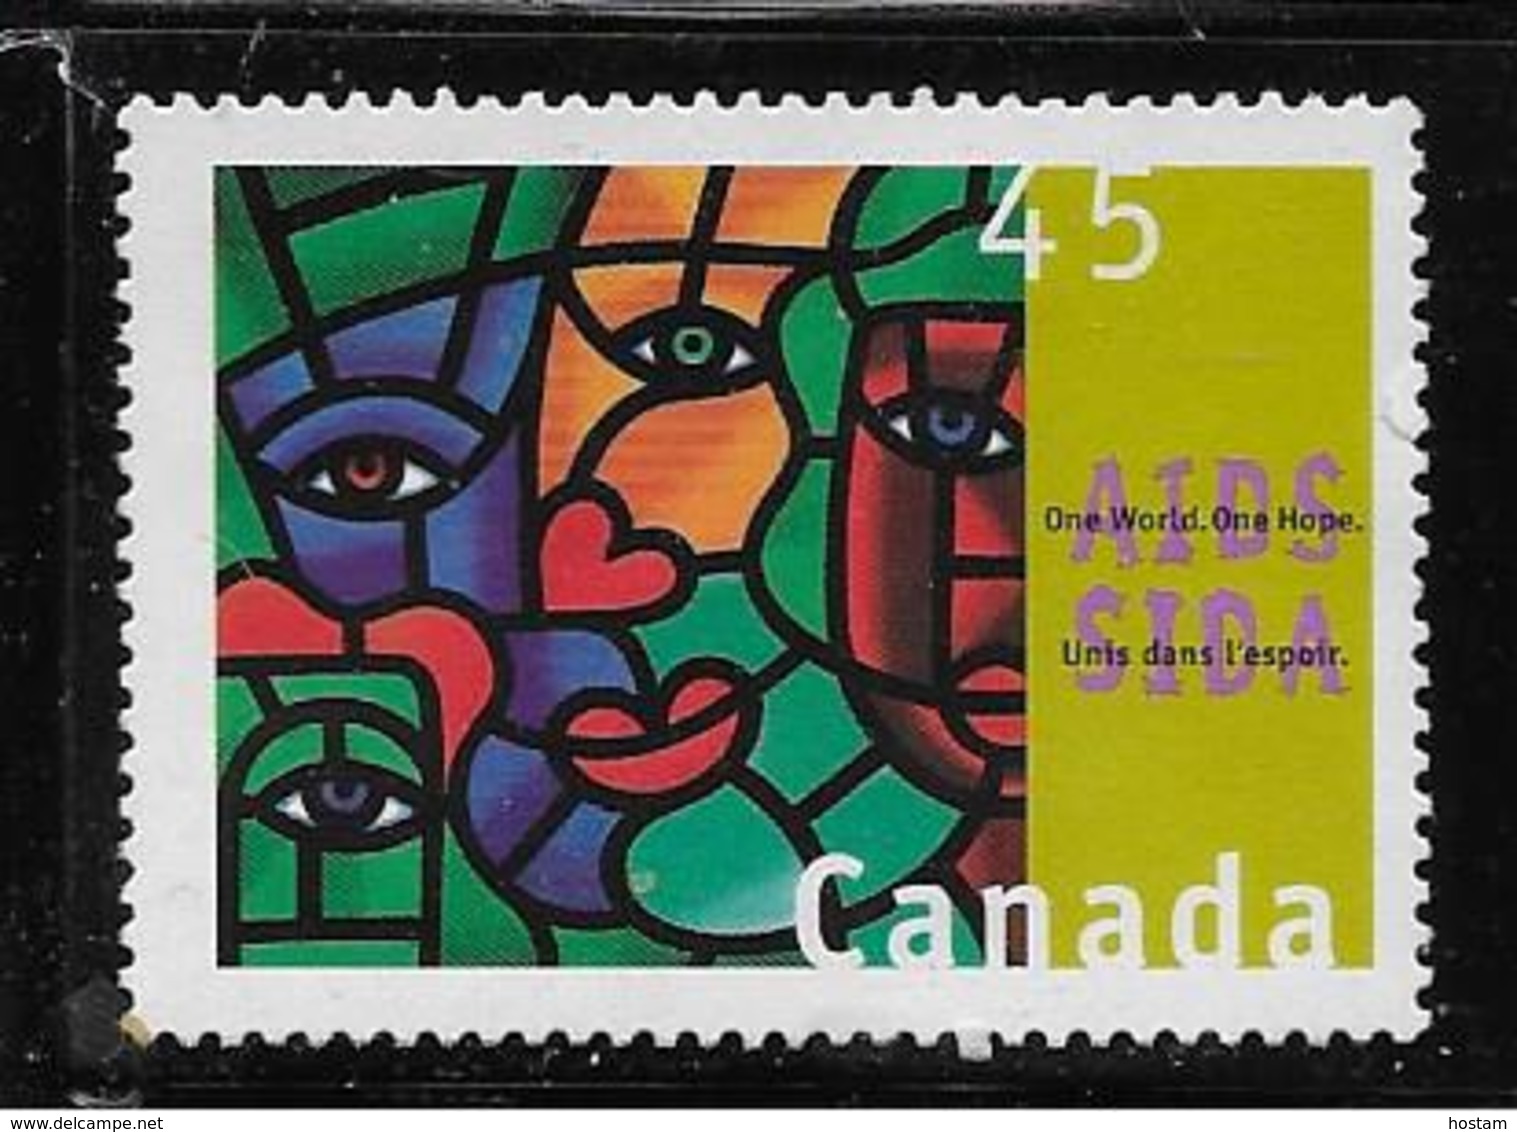 CANADA, 1996, USED  # 1603,   A IDS  AWARENESS: One World, One  Hope - Oblitérés